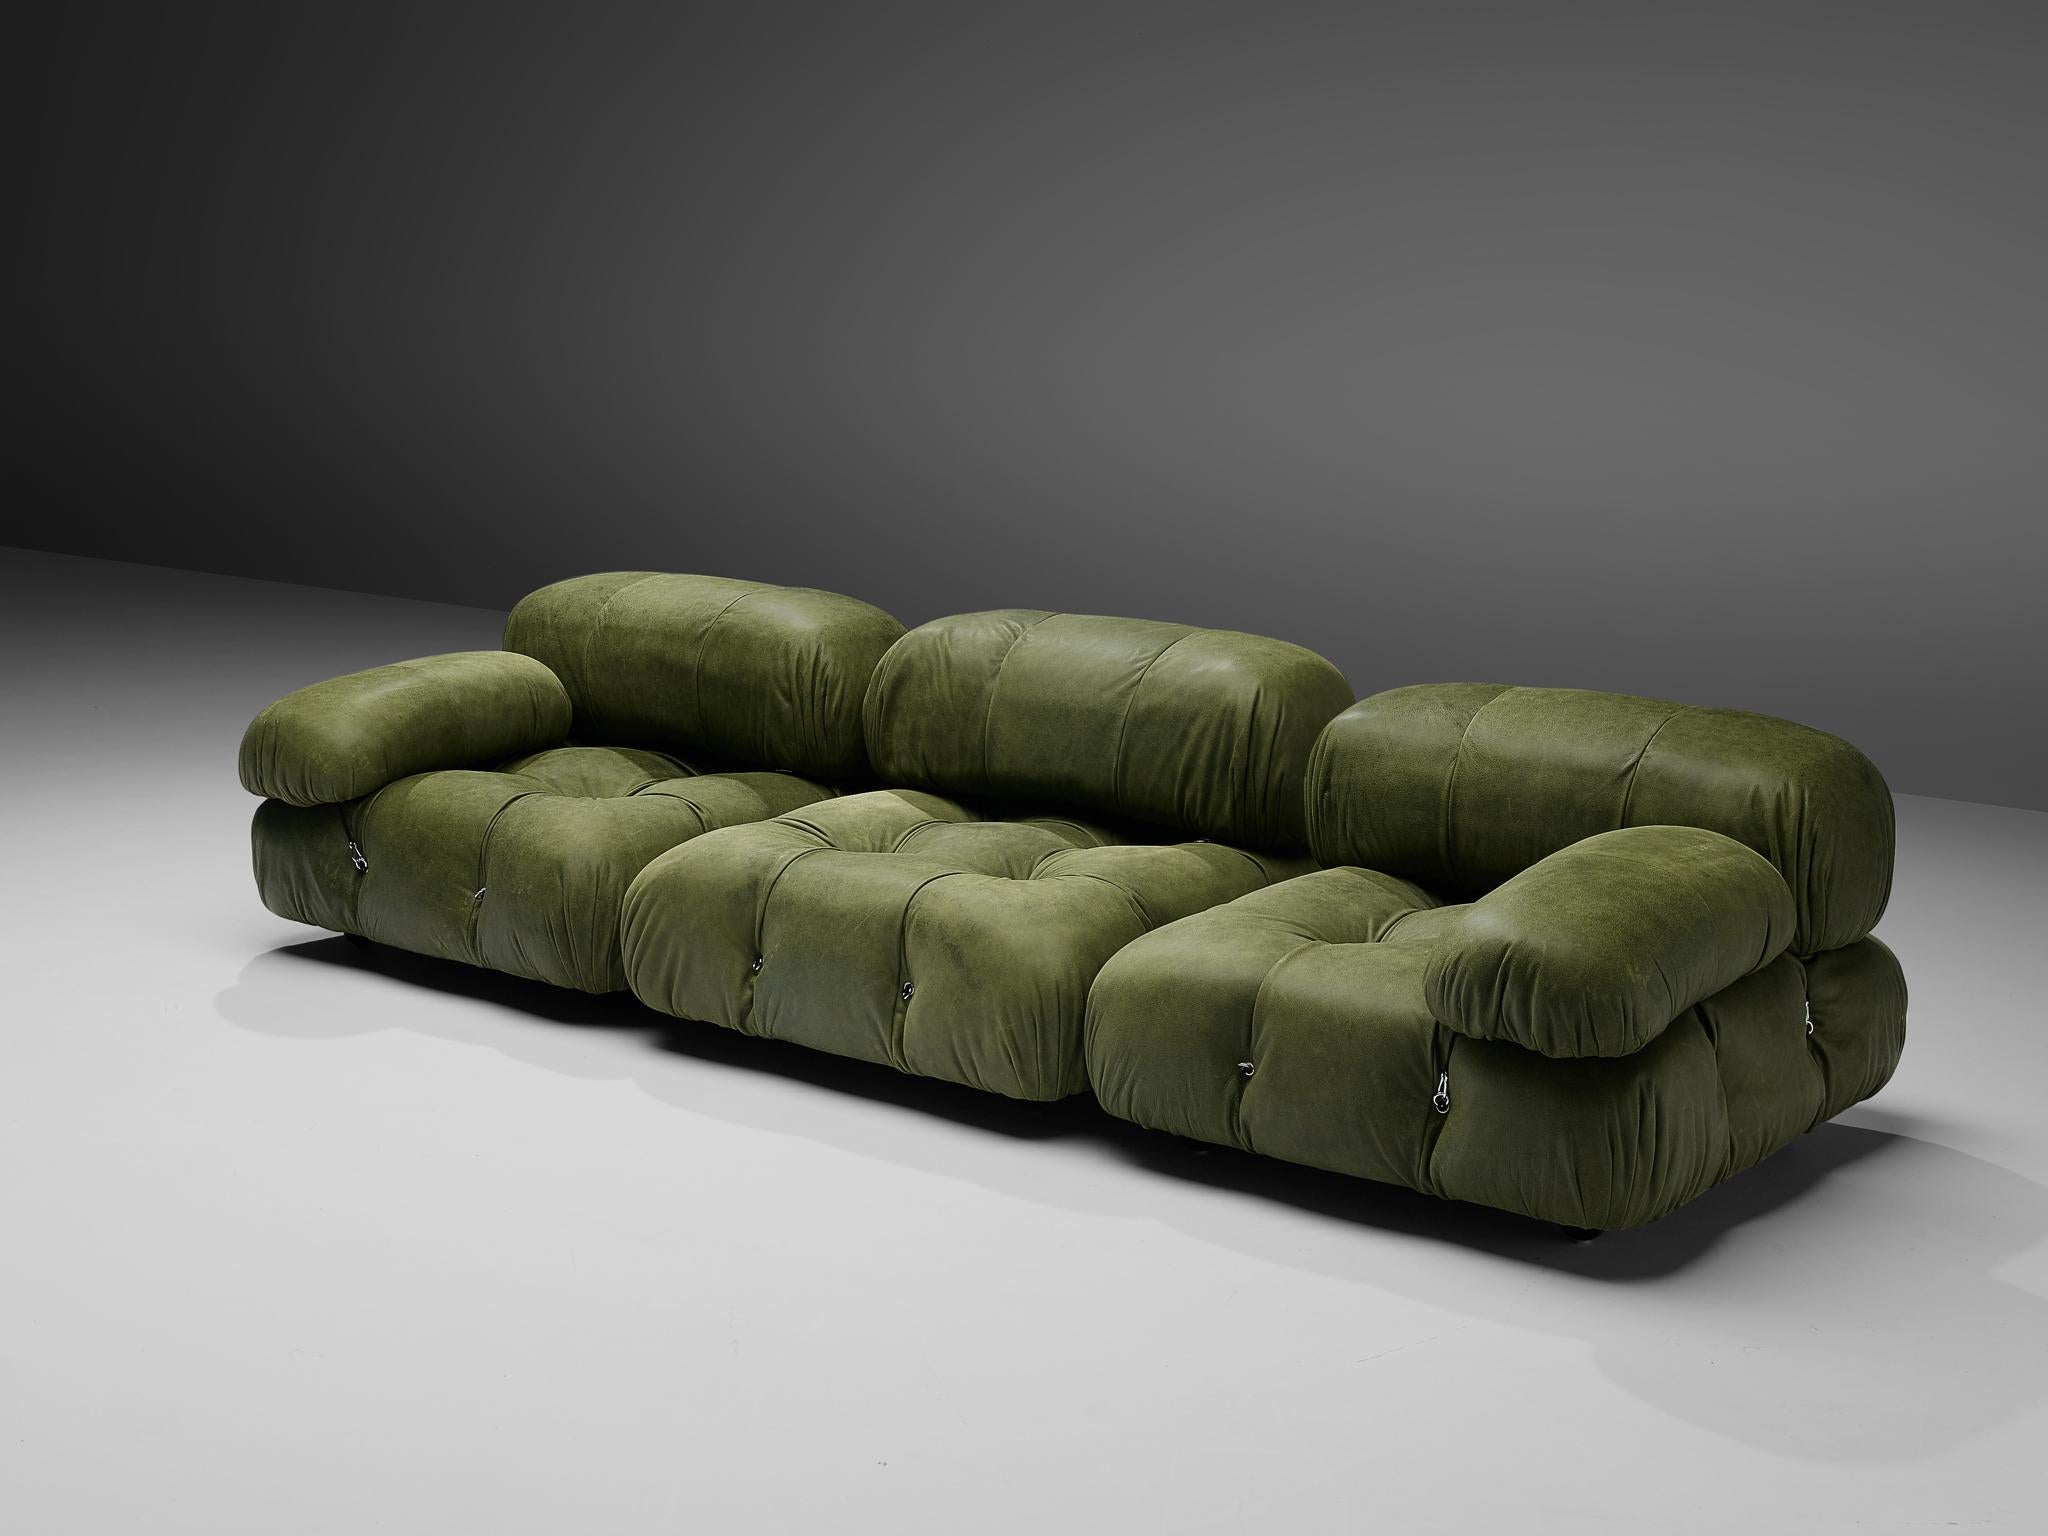 Mario Bellini, 'Camaleonda' sofa, green leather upholstery, Italy, 1972

Mario Bellini designed the 'Camaleonda' sectional sofa, here with eight elements of which six feature a backrest, in 1972. The sectional elements of this sofa can be used